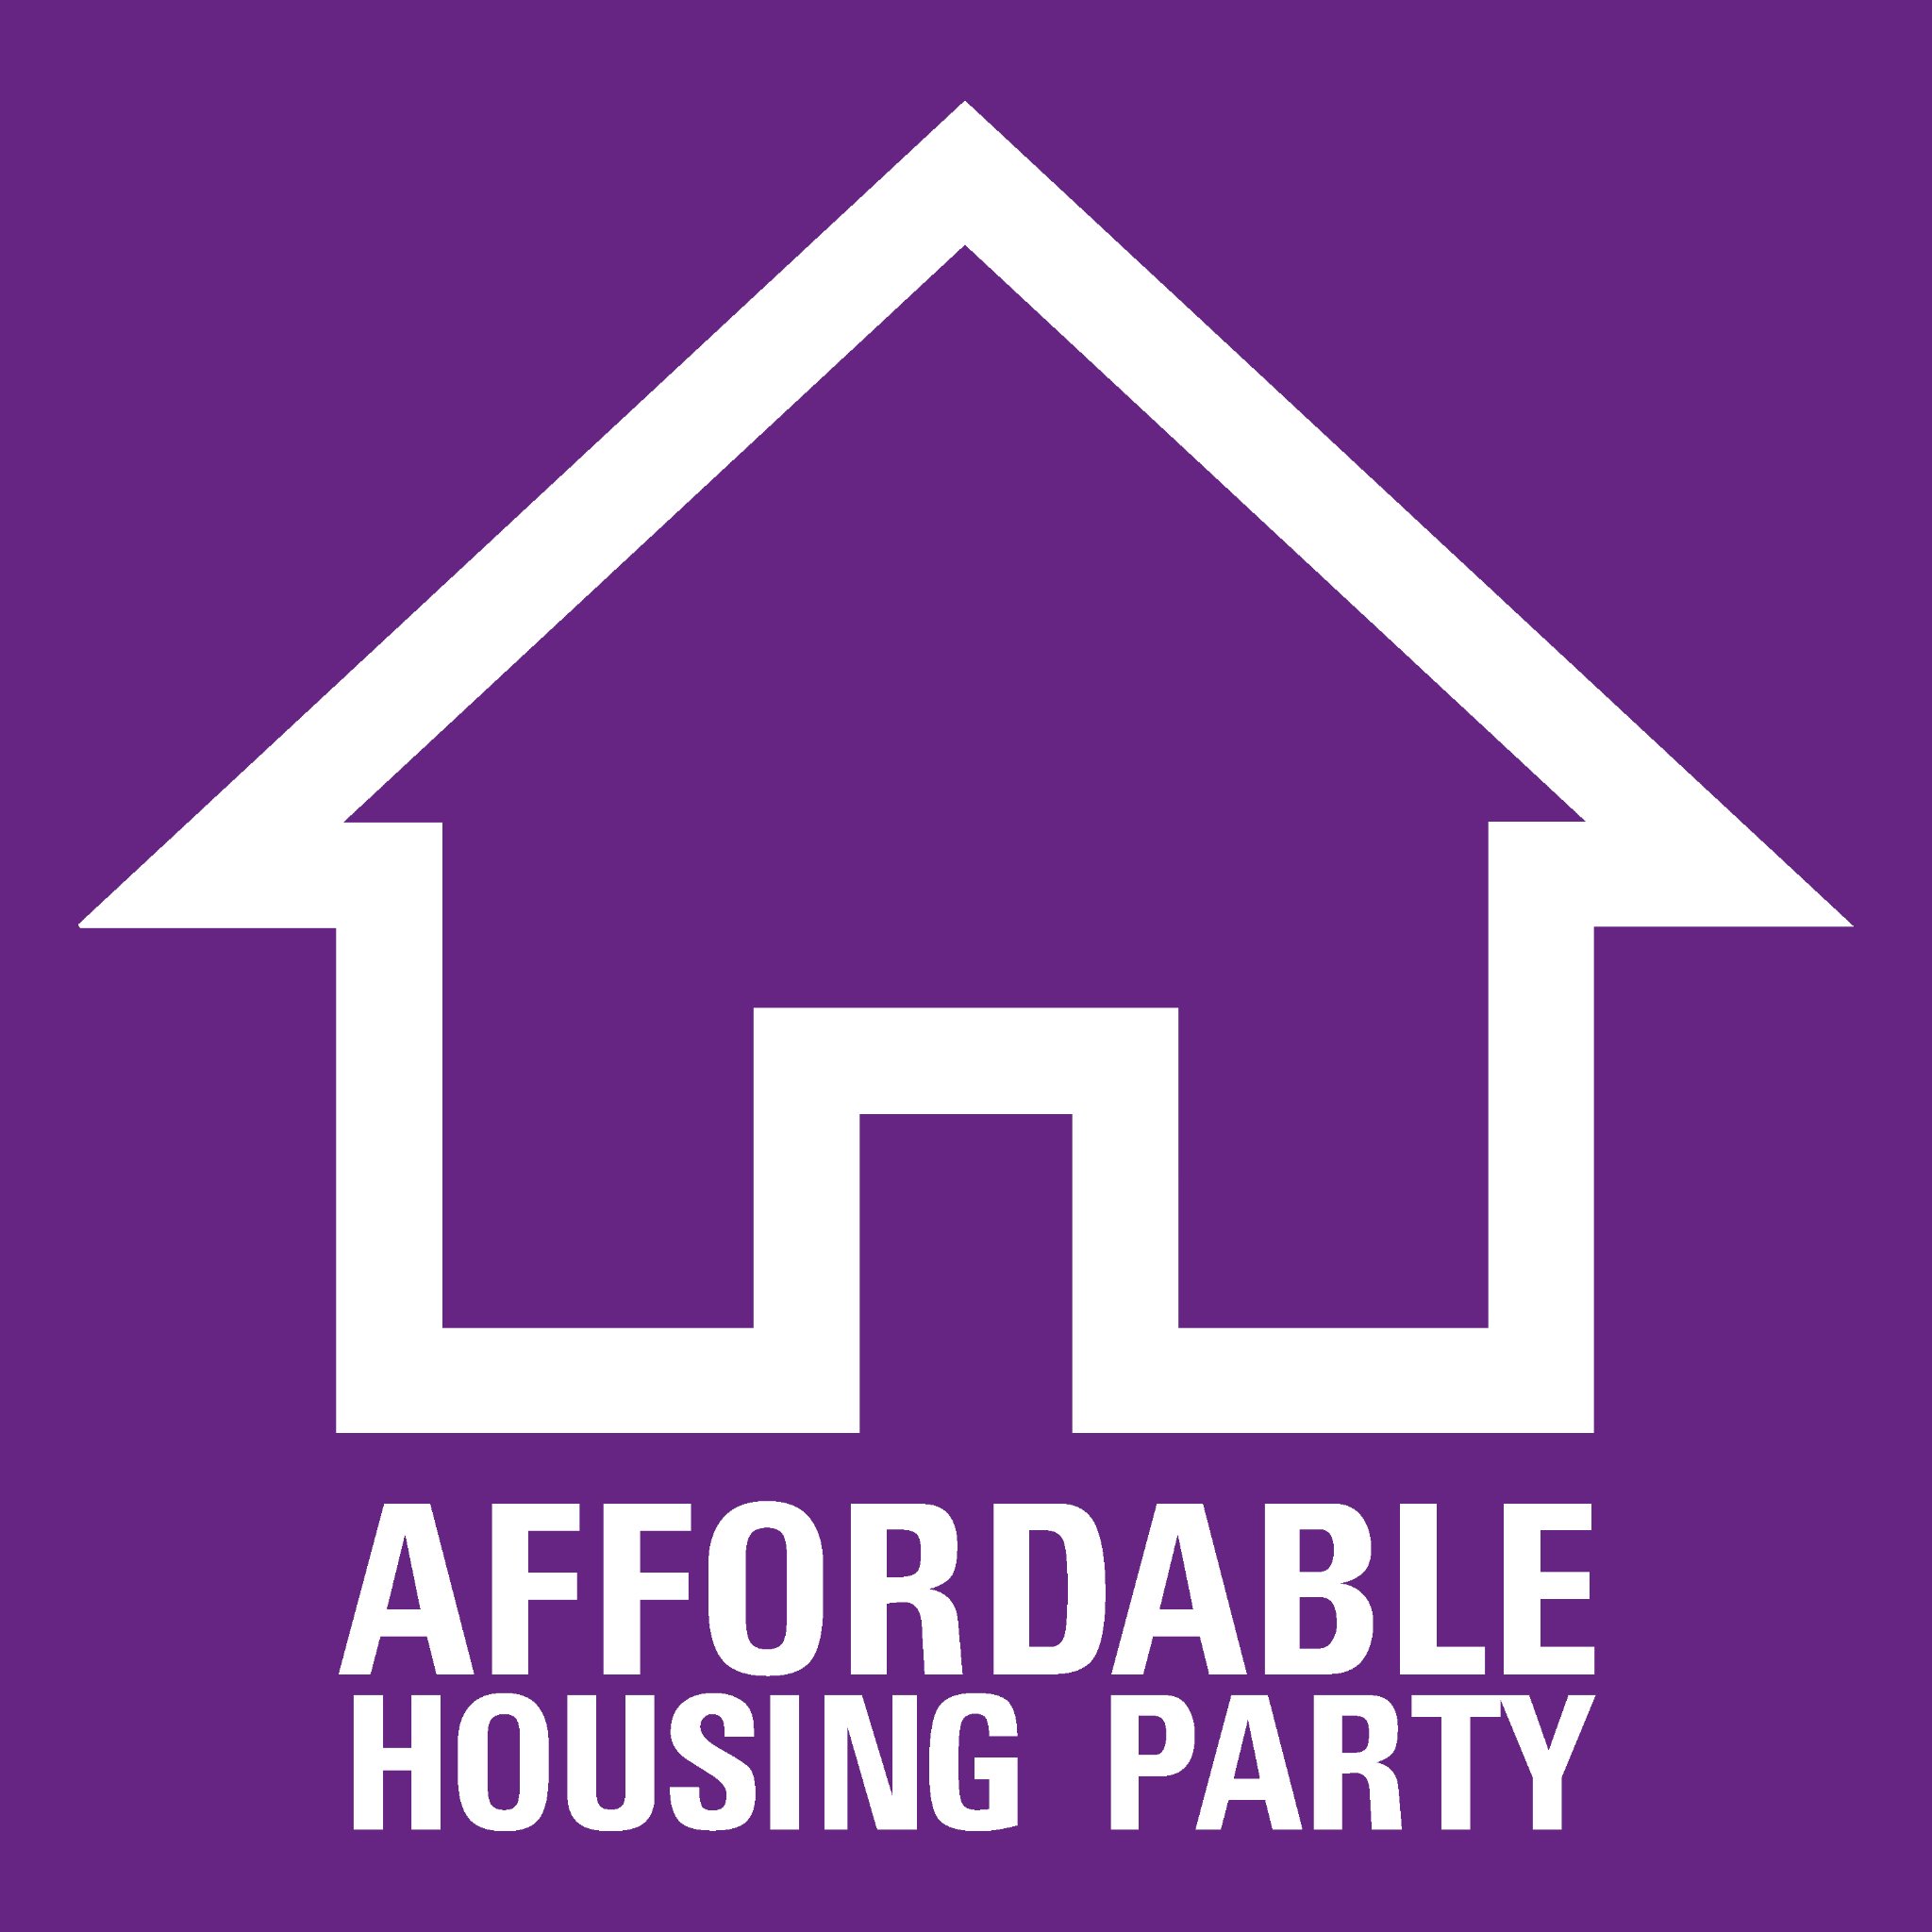 Authorised by Andrew Potts, the Affordable Housing Party, Ashfield